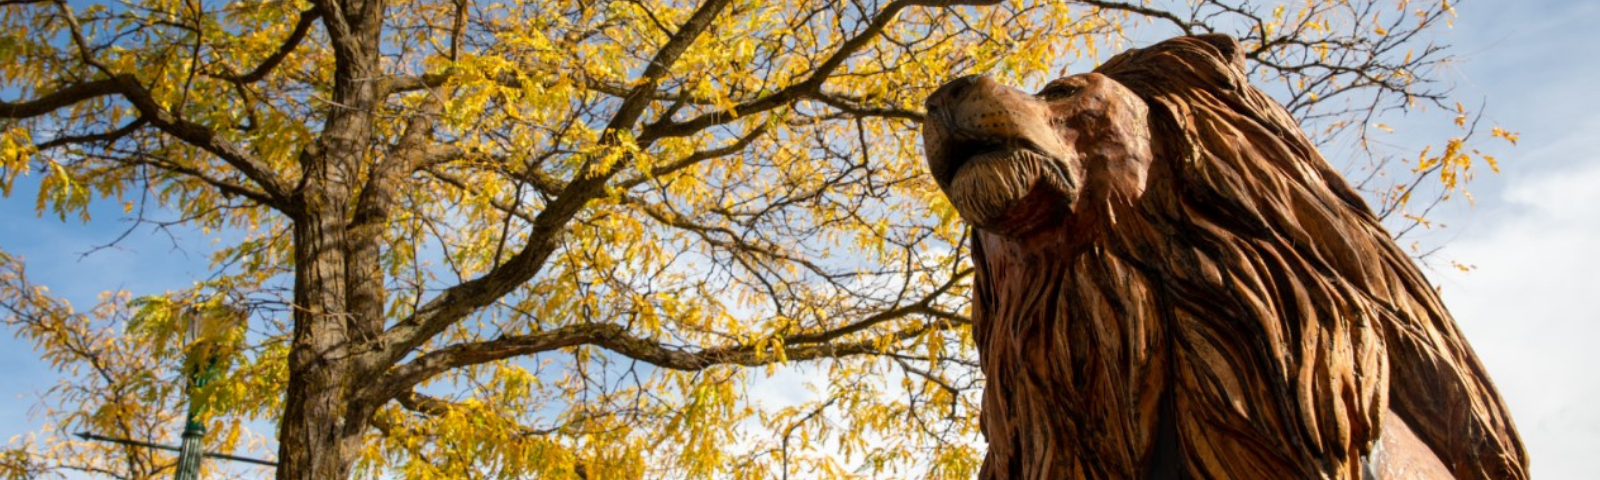 Tree sculpture of a lion with leaves in background